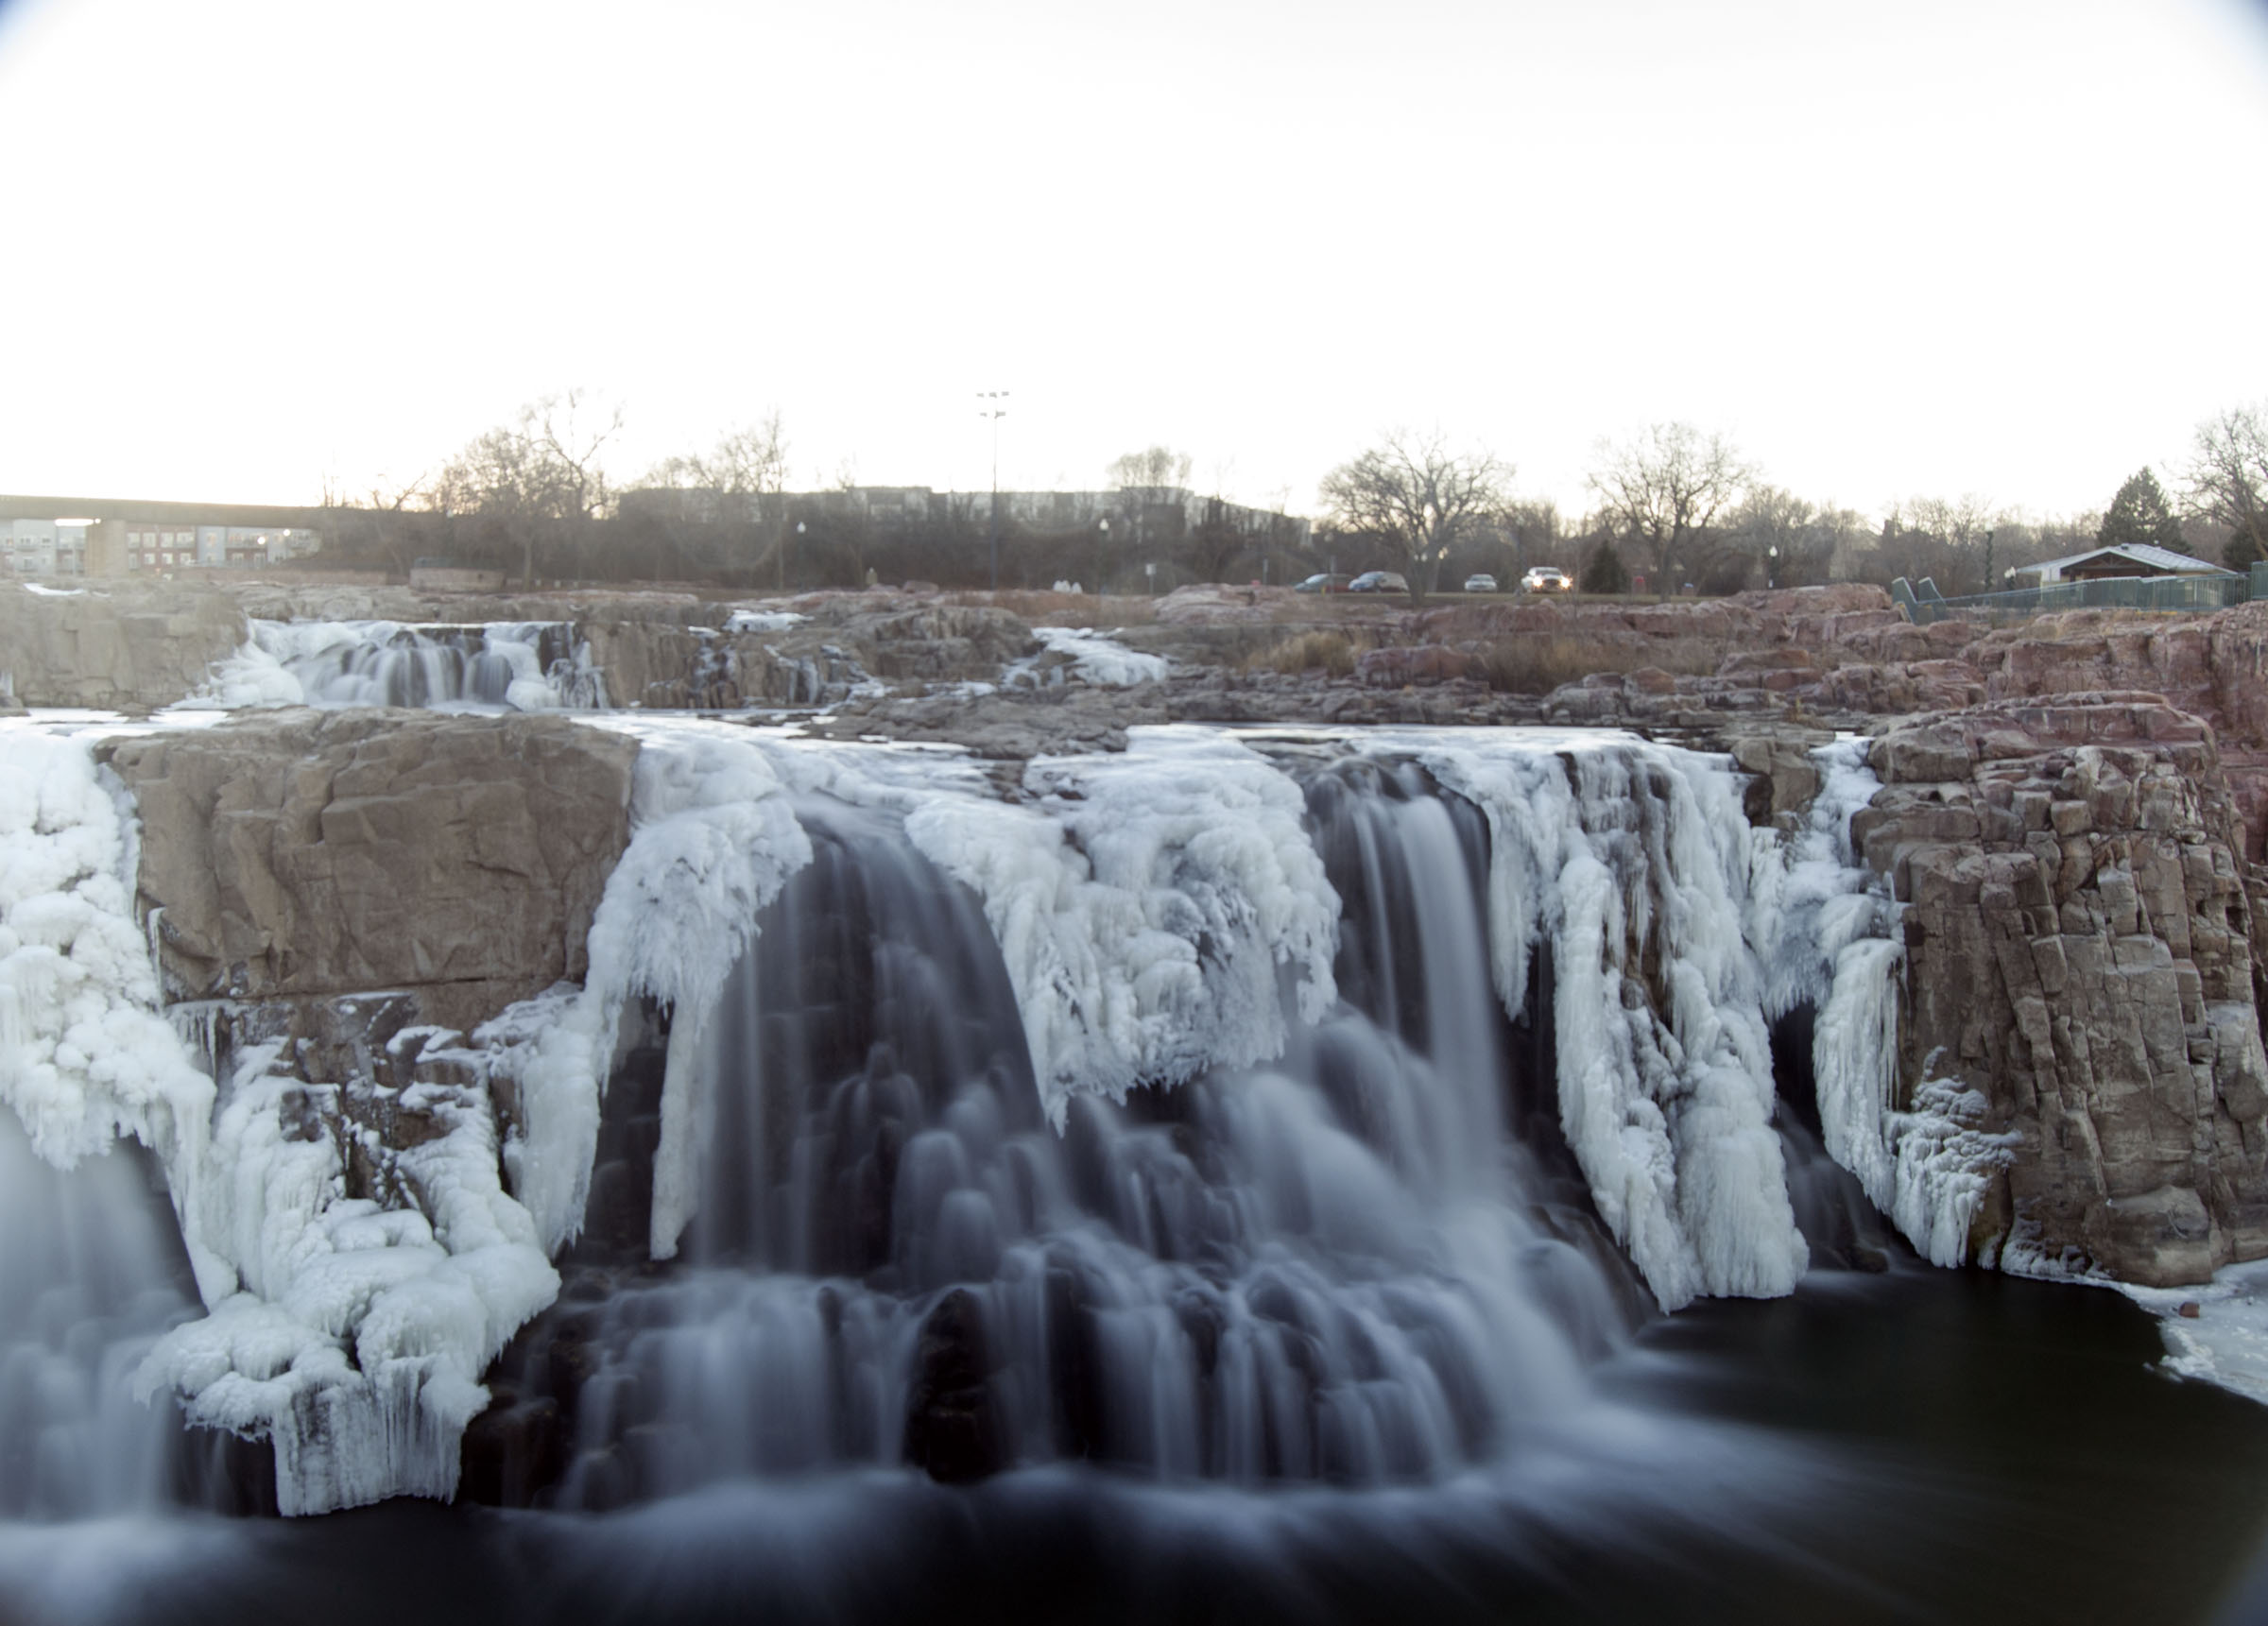 Sioux Falls Waterfall with ice formations and running water 02